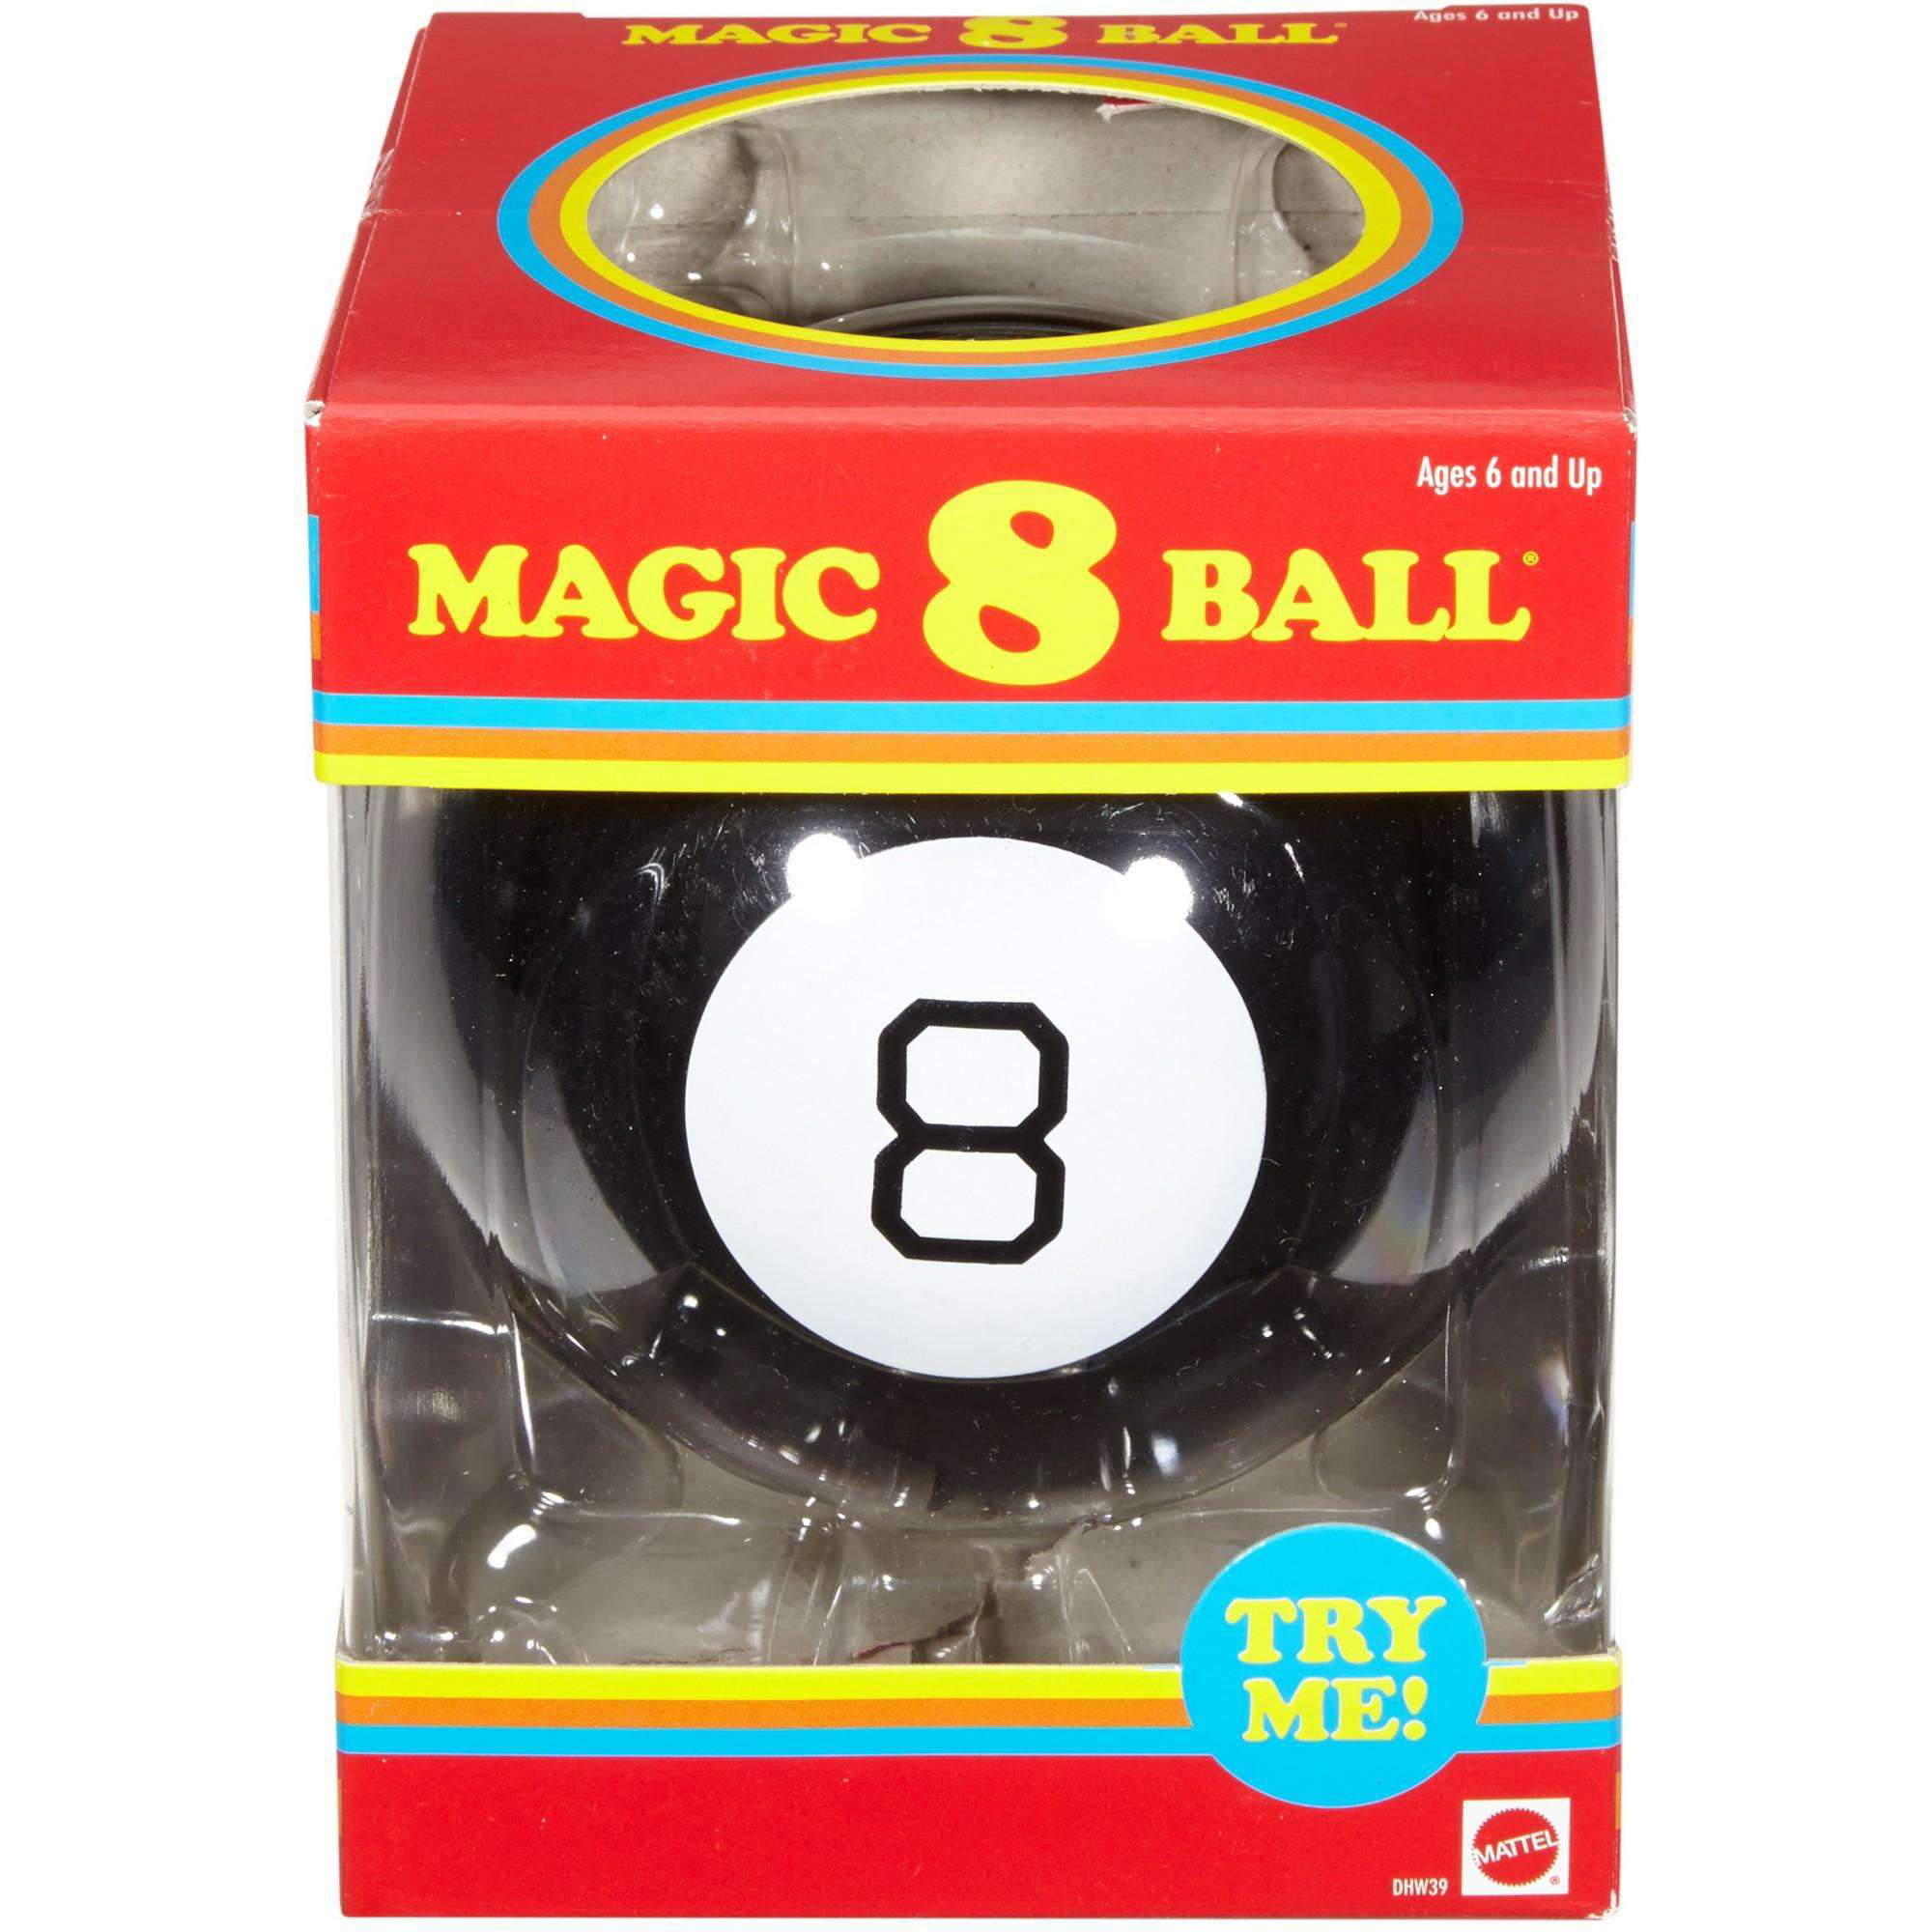 Magic 8 Ball Retro Edition Game Birthday Party Game Toy Gift fortune teller 